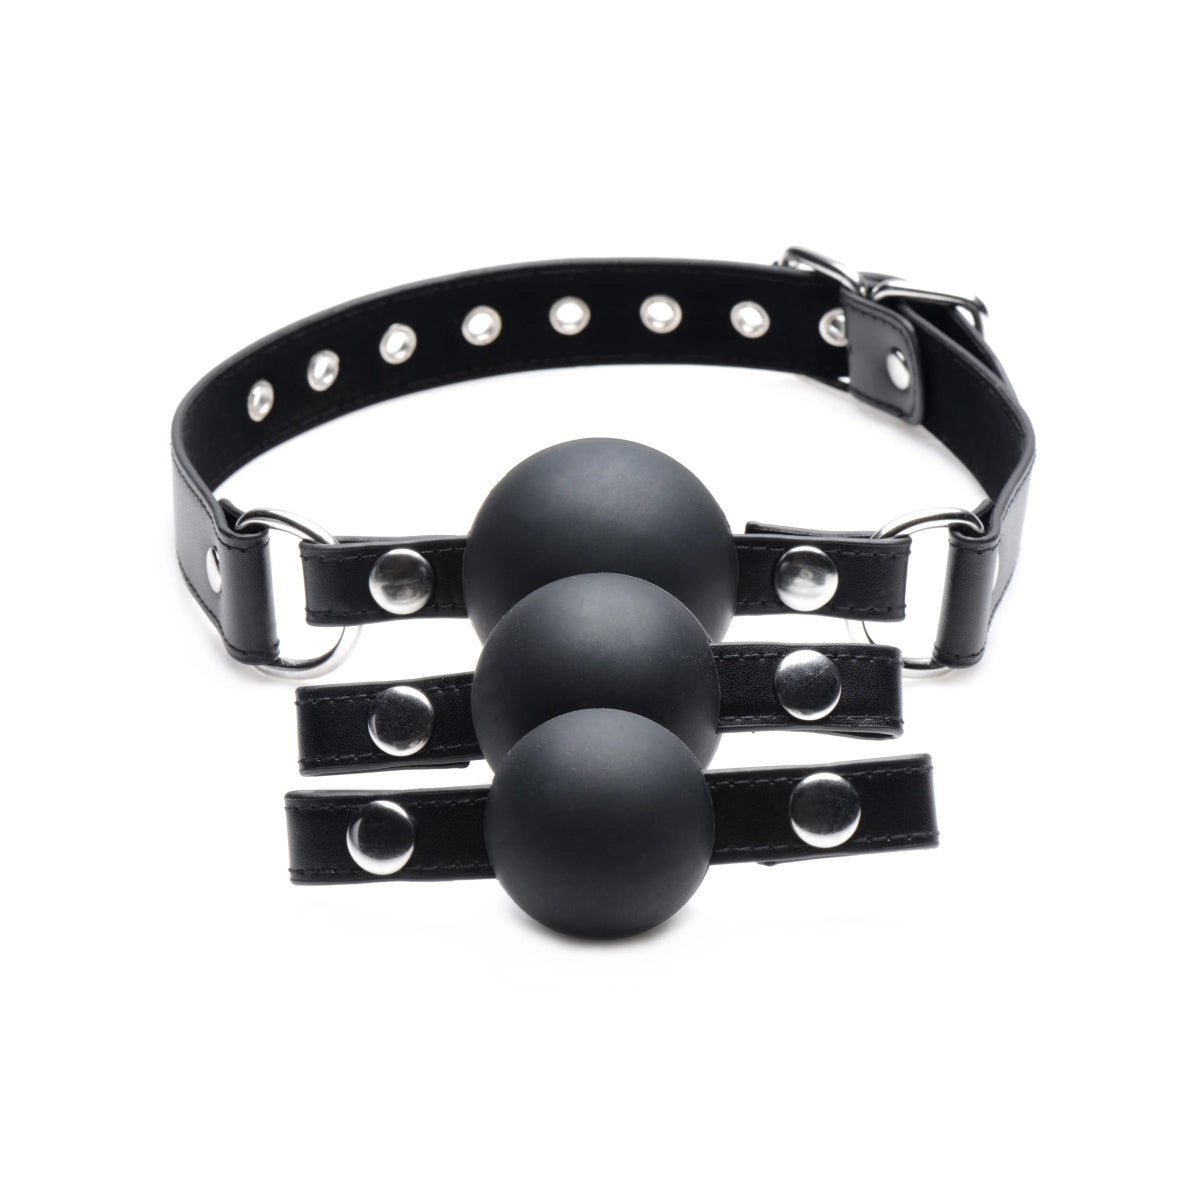 Strict Interchangeable Silicone Ball Gag Set Black